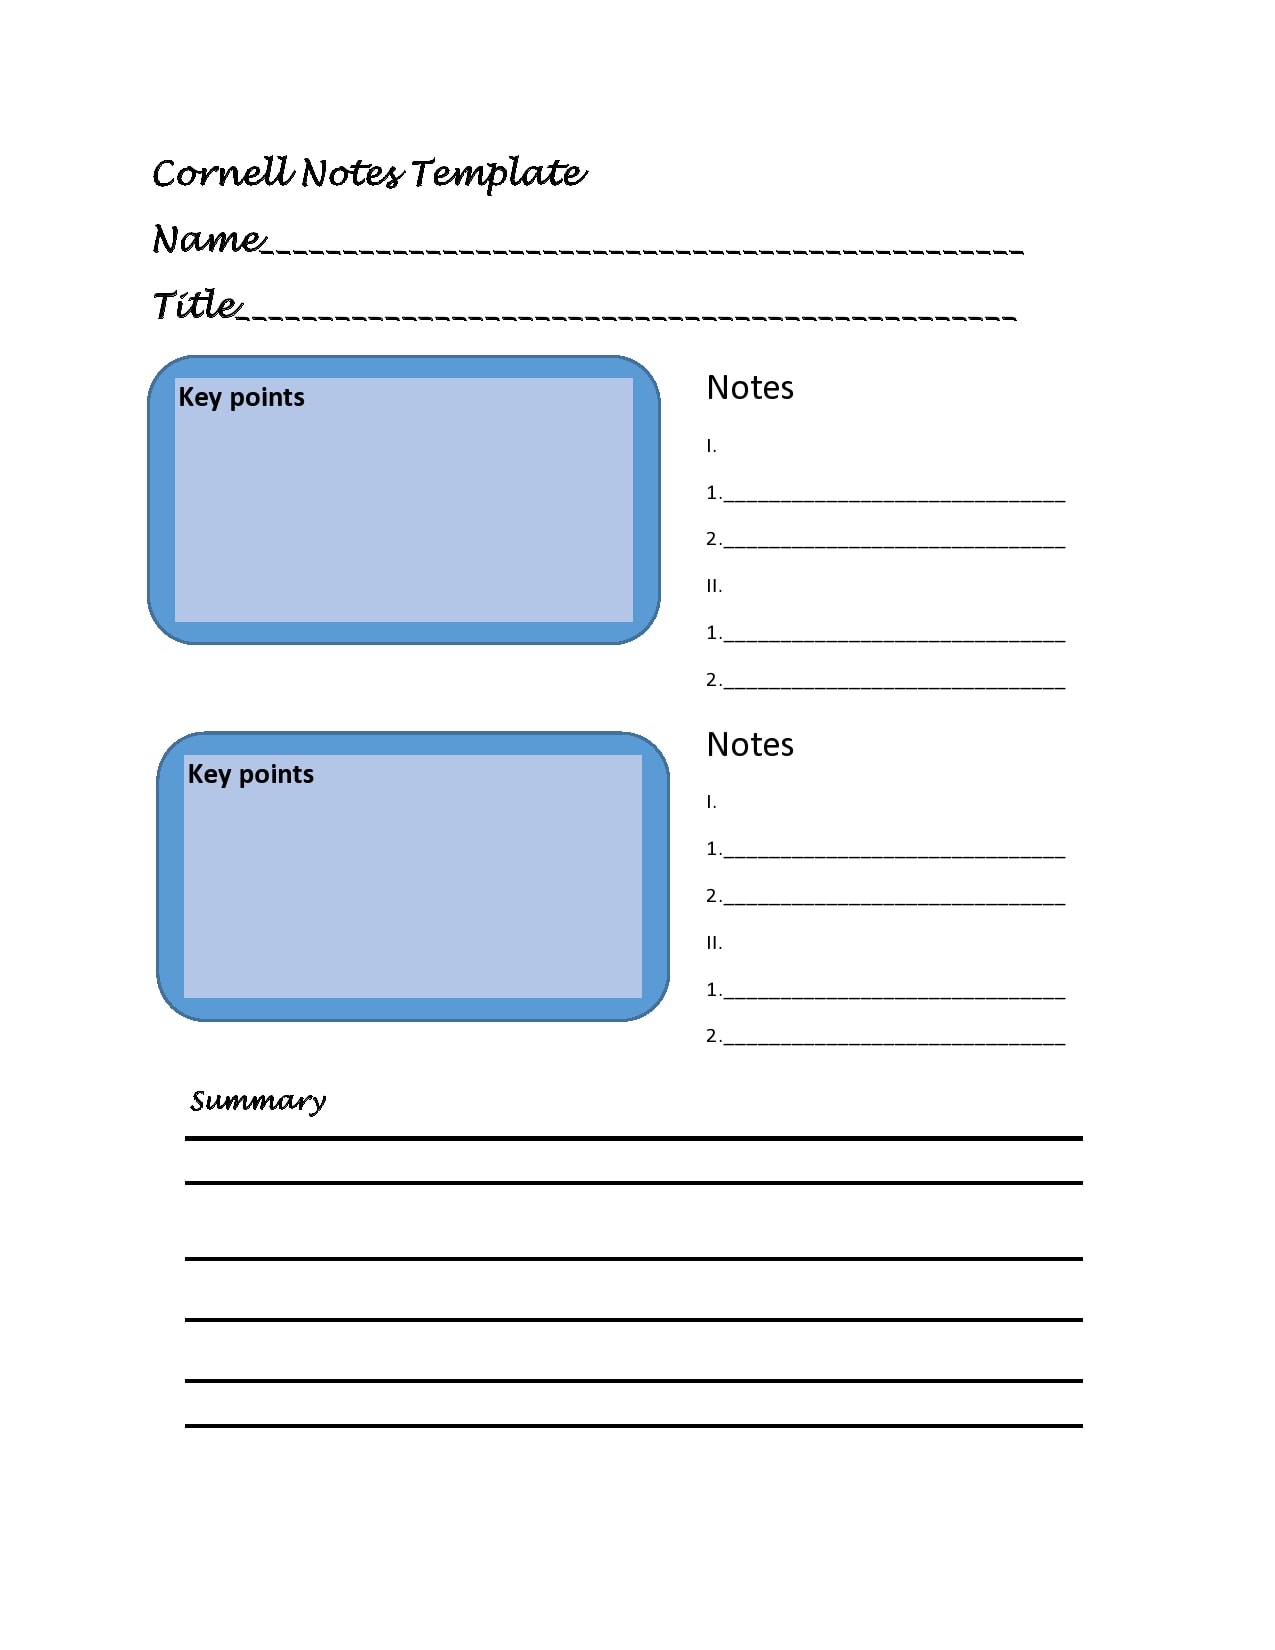 22 Printable Cornell Notes Templates [Free] - TemplateArchive Inside Best Note Taking Template